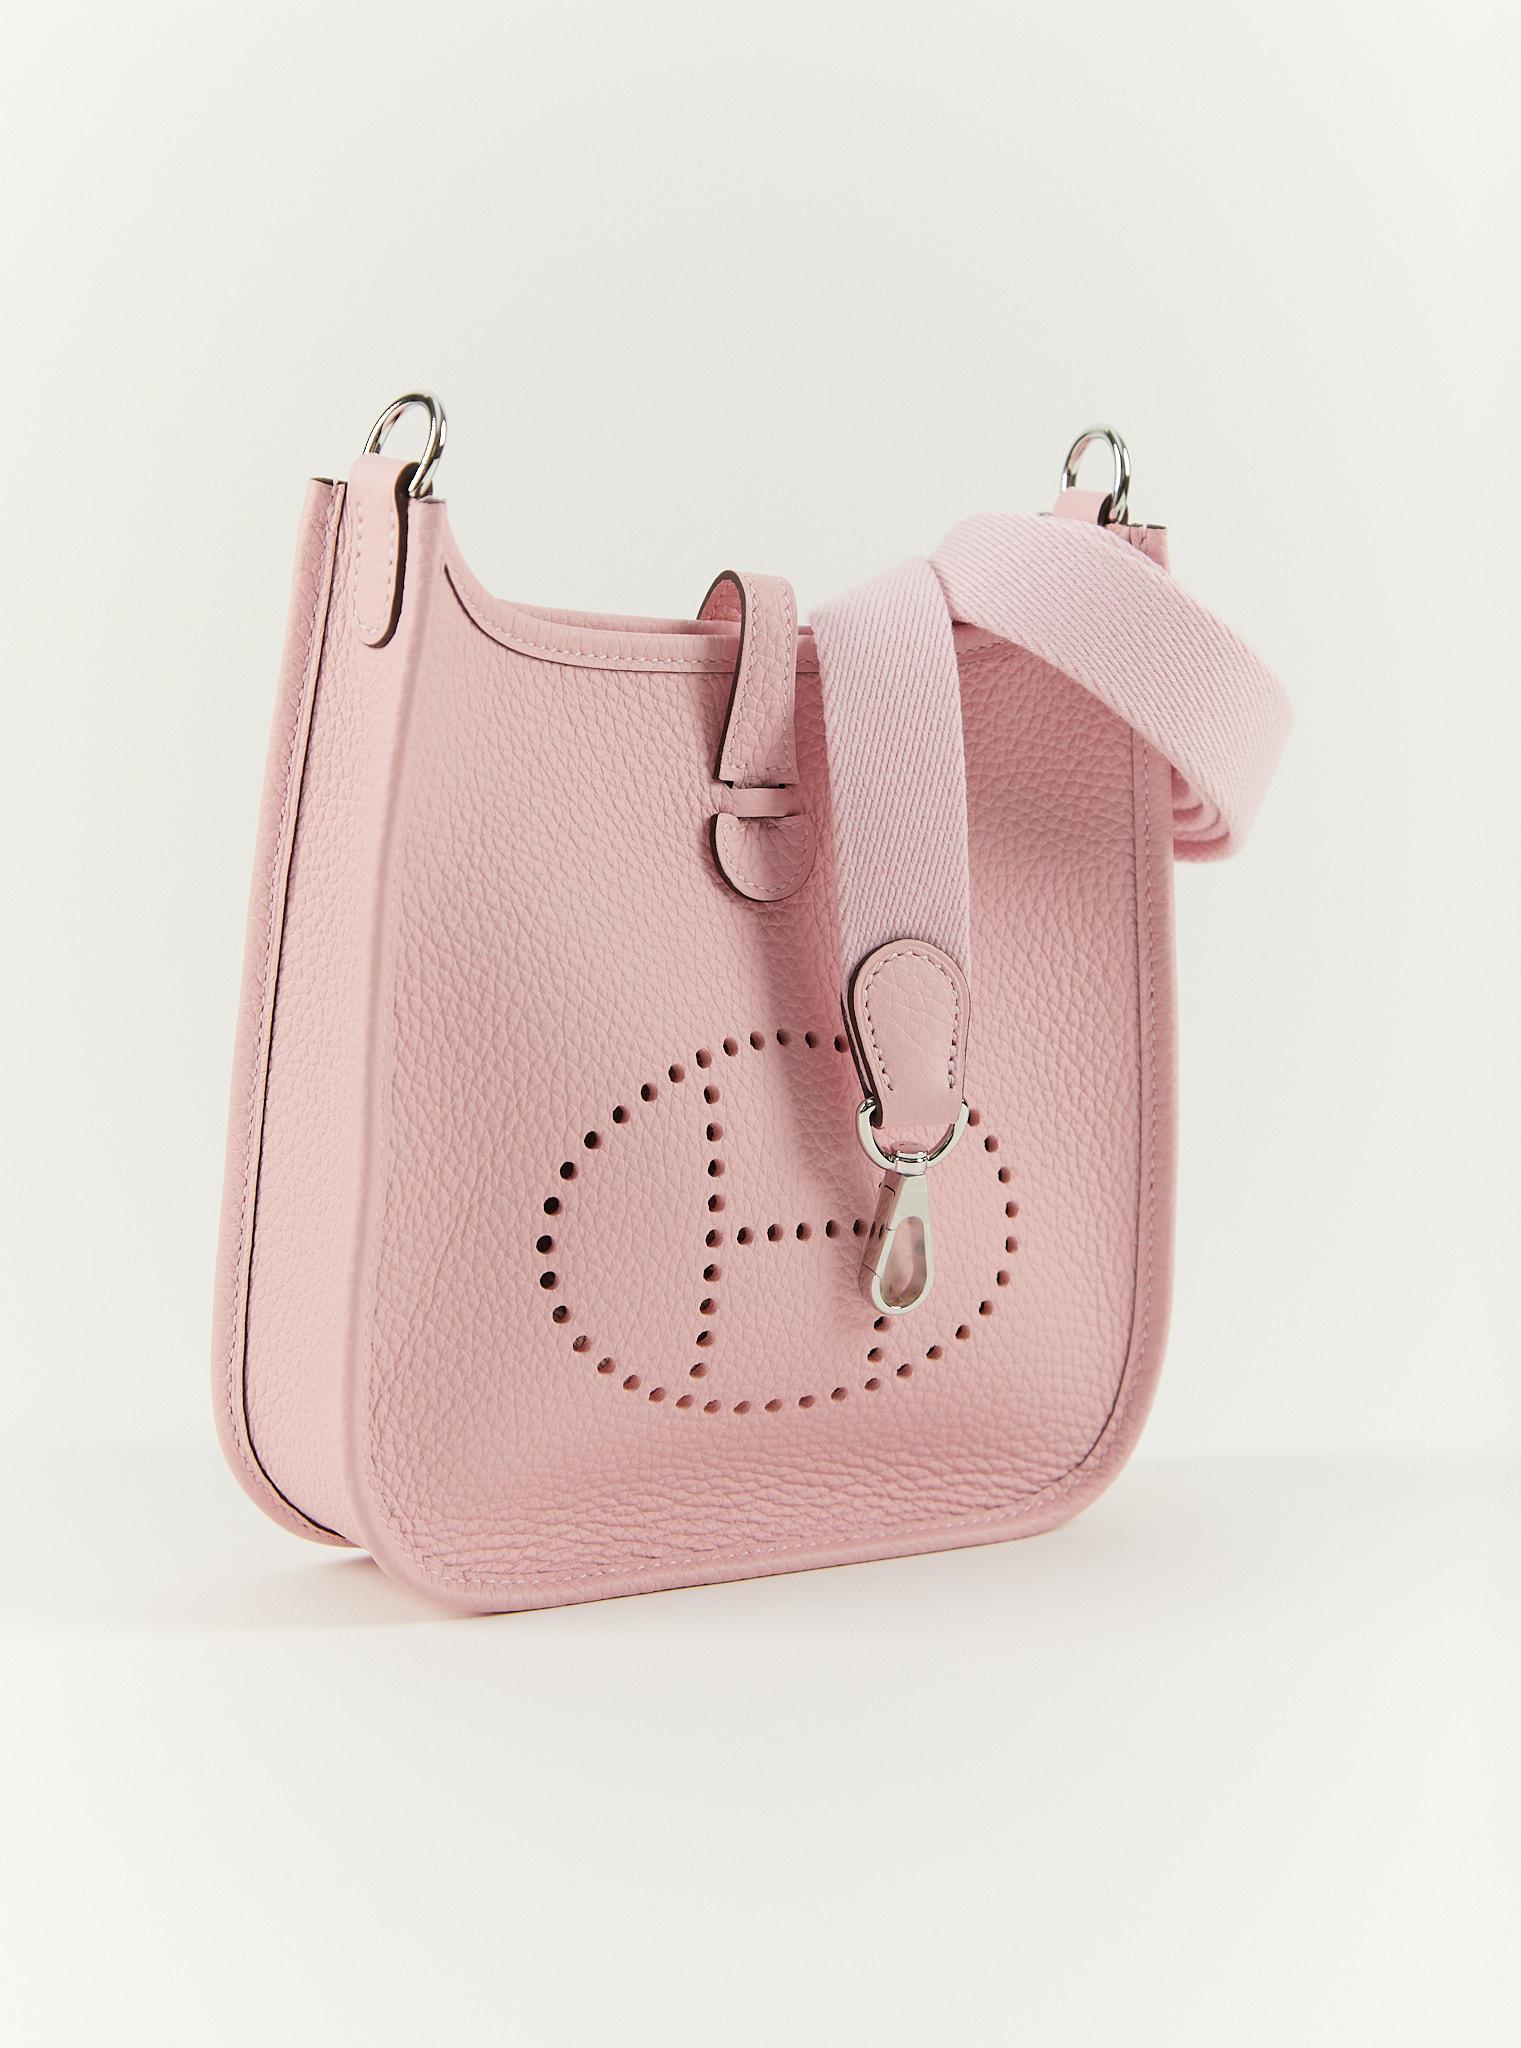 Hermès Mini Evelyne TPM in Rose Sakura

Clemence Leather with PalladiumHardware

Canvas Shoulder/Crossbody strap

W Stamp / 2024

Accompanied by: Copy receipt, Hermes box, Hermes dustbag, shoulder strap, shoulder strap dustbag and